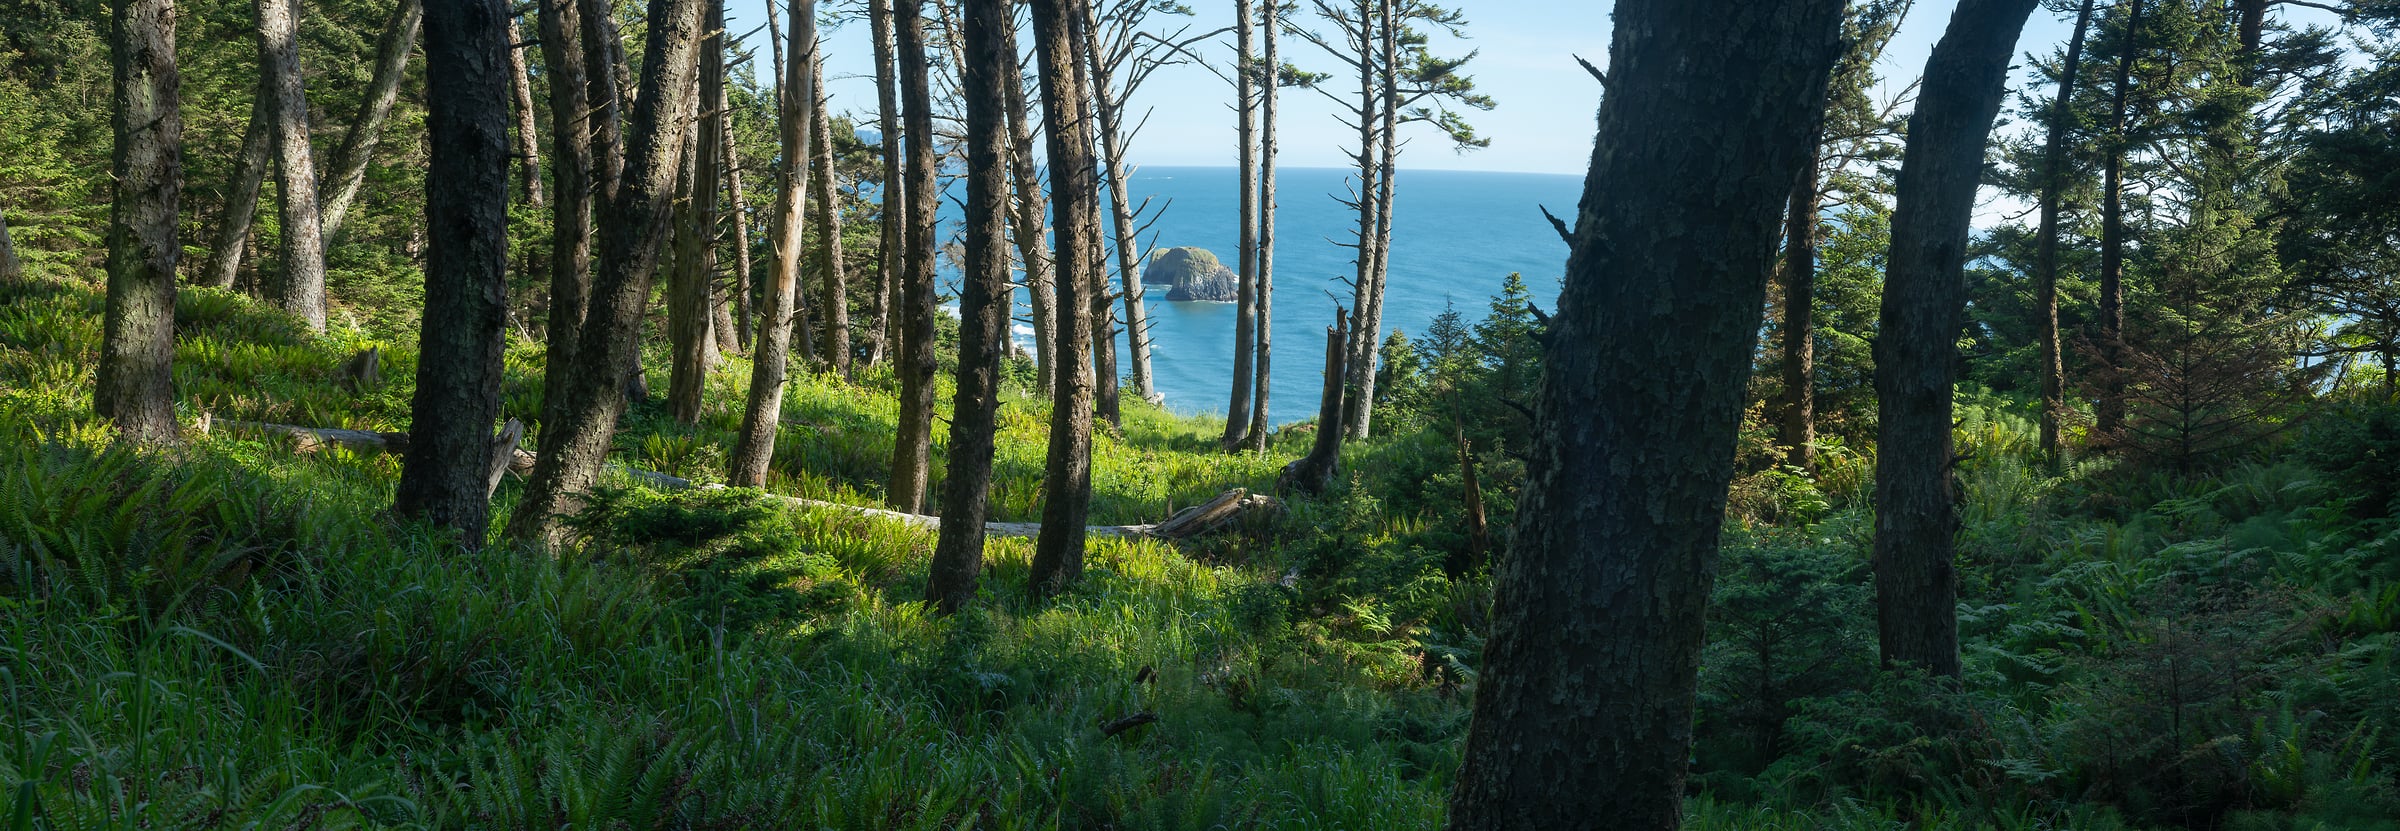 277 megapixels! A very high resolution, large-format VAST photo print of woods and the Oregon coastline in Ecola State Park; photograph created by Greg Probst.